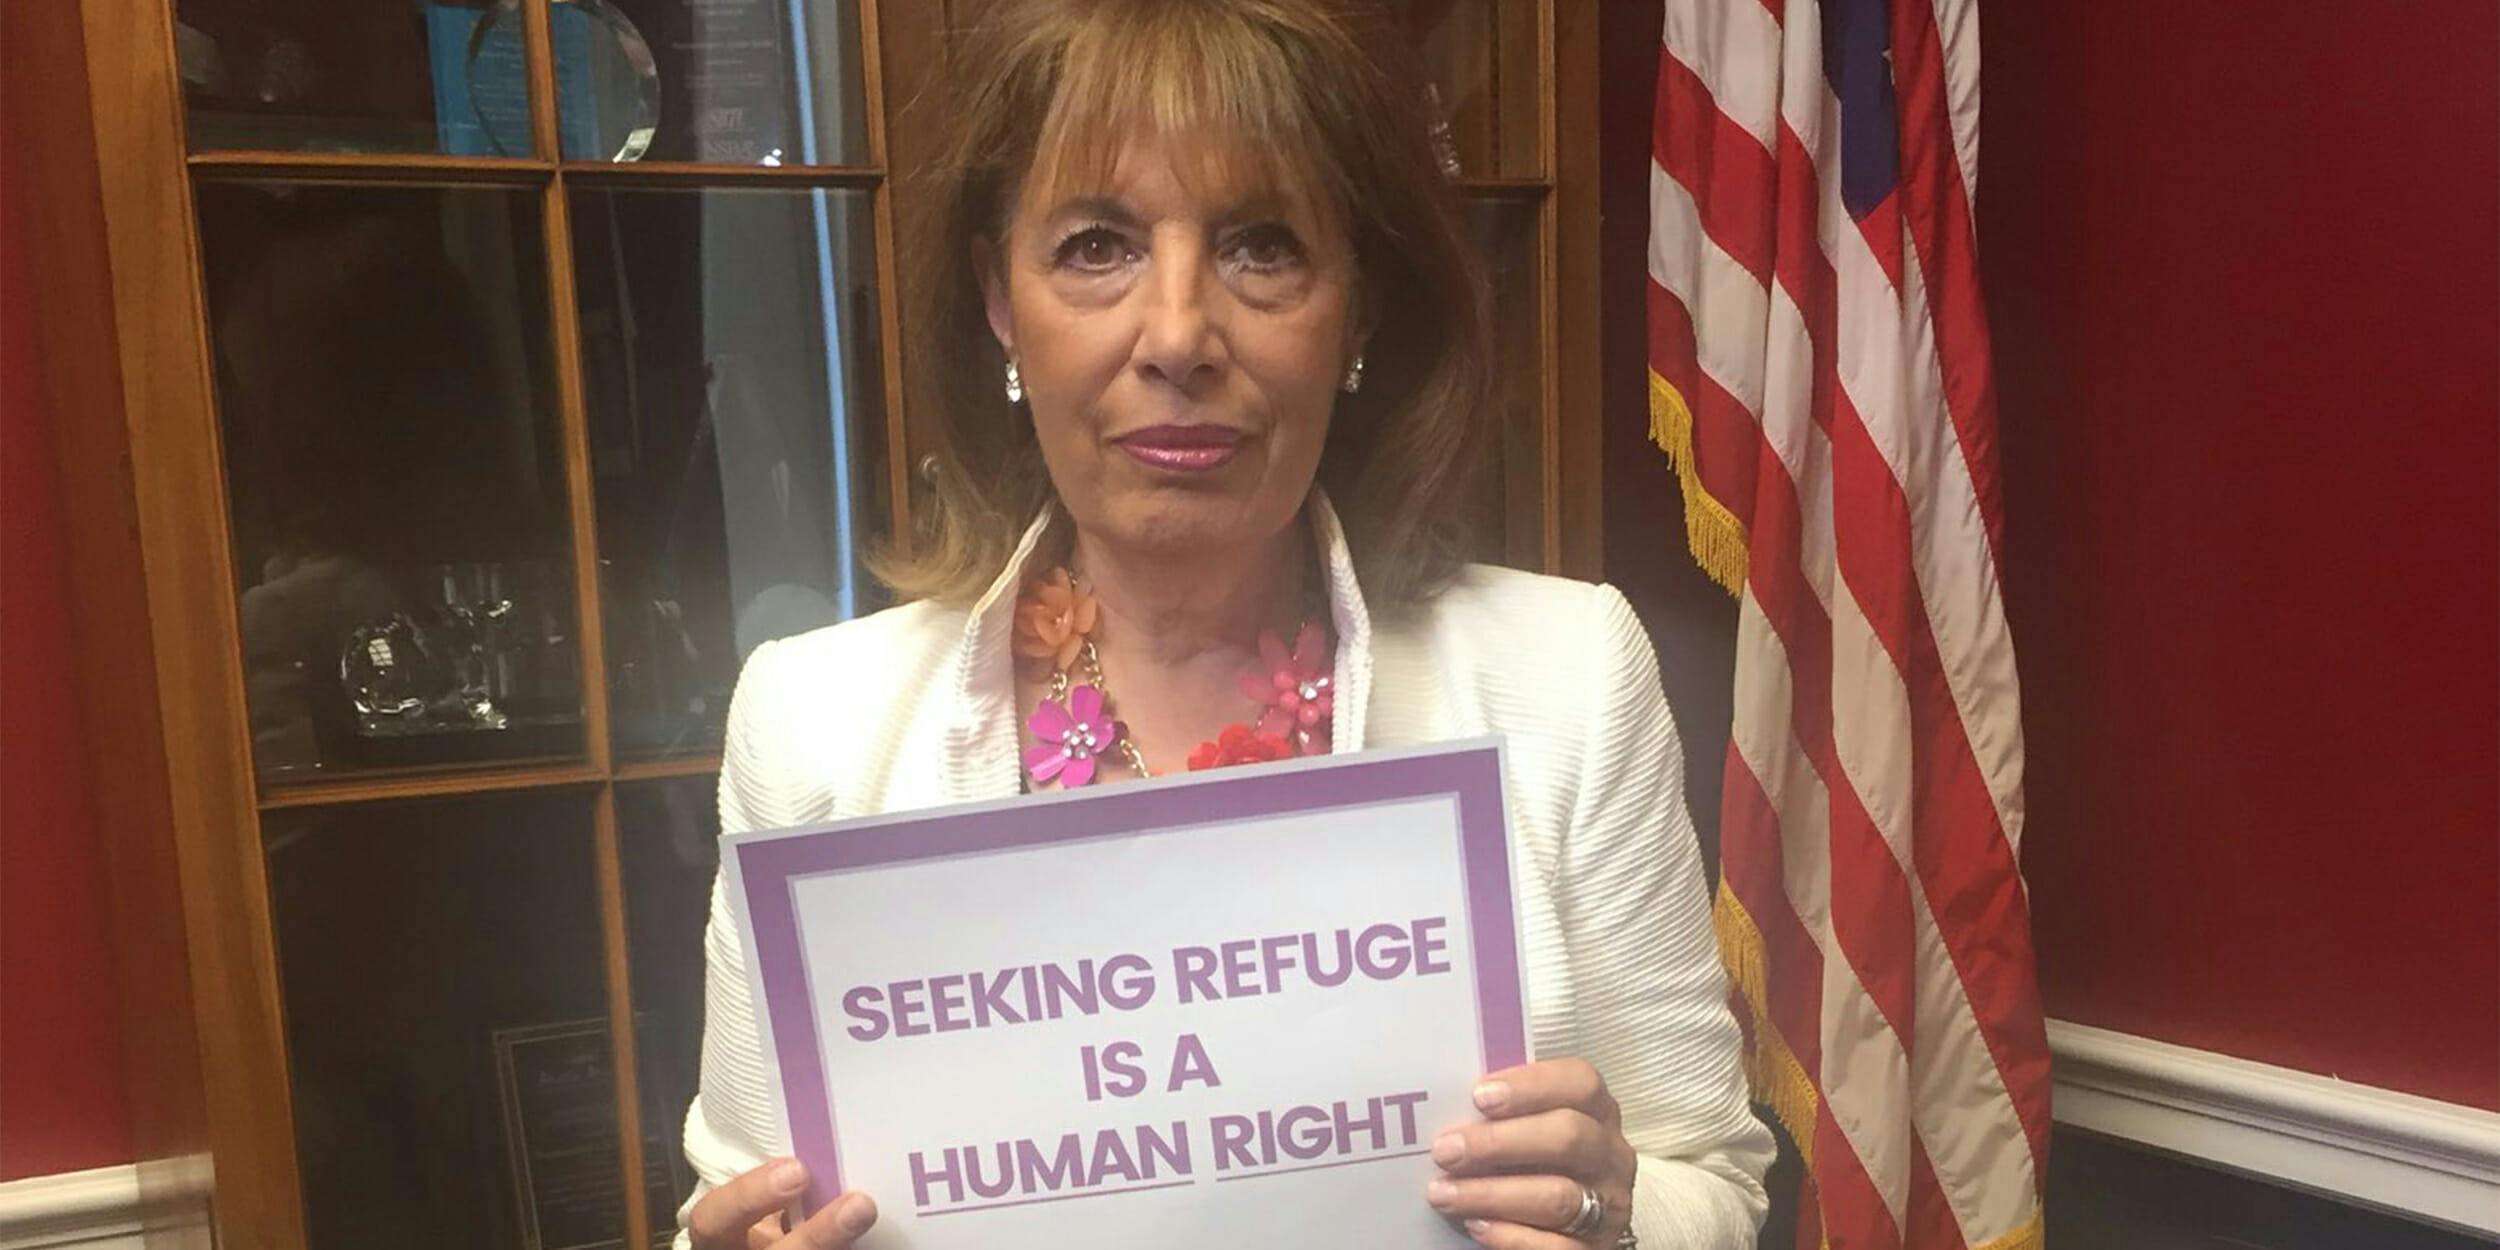 Rep. Jackie Speier holding "Seeking refuge is a human right" sign